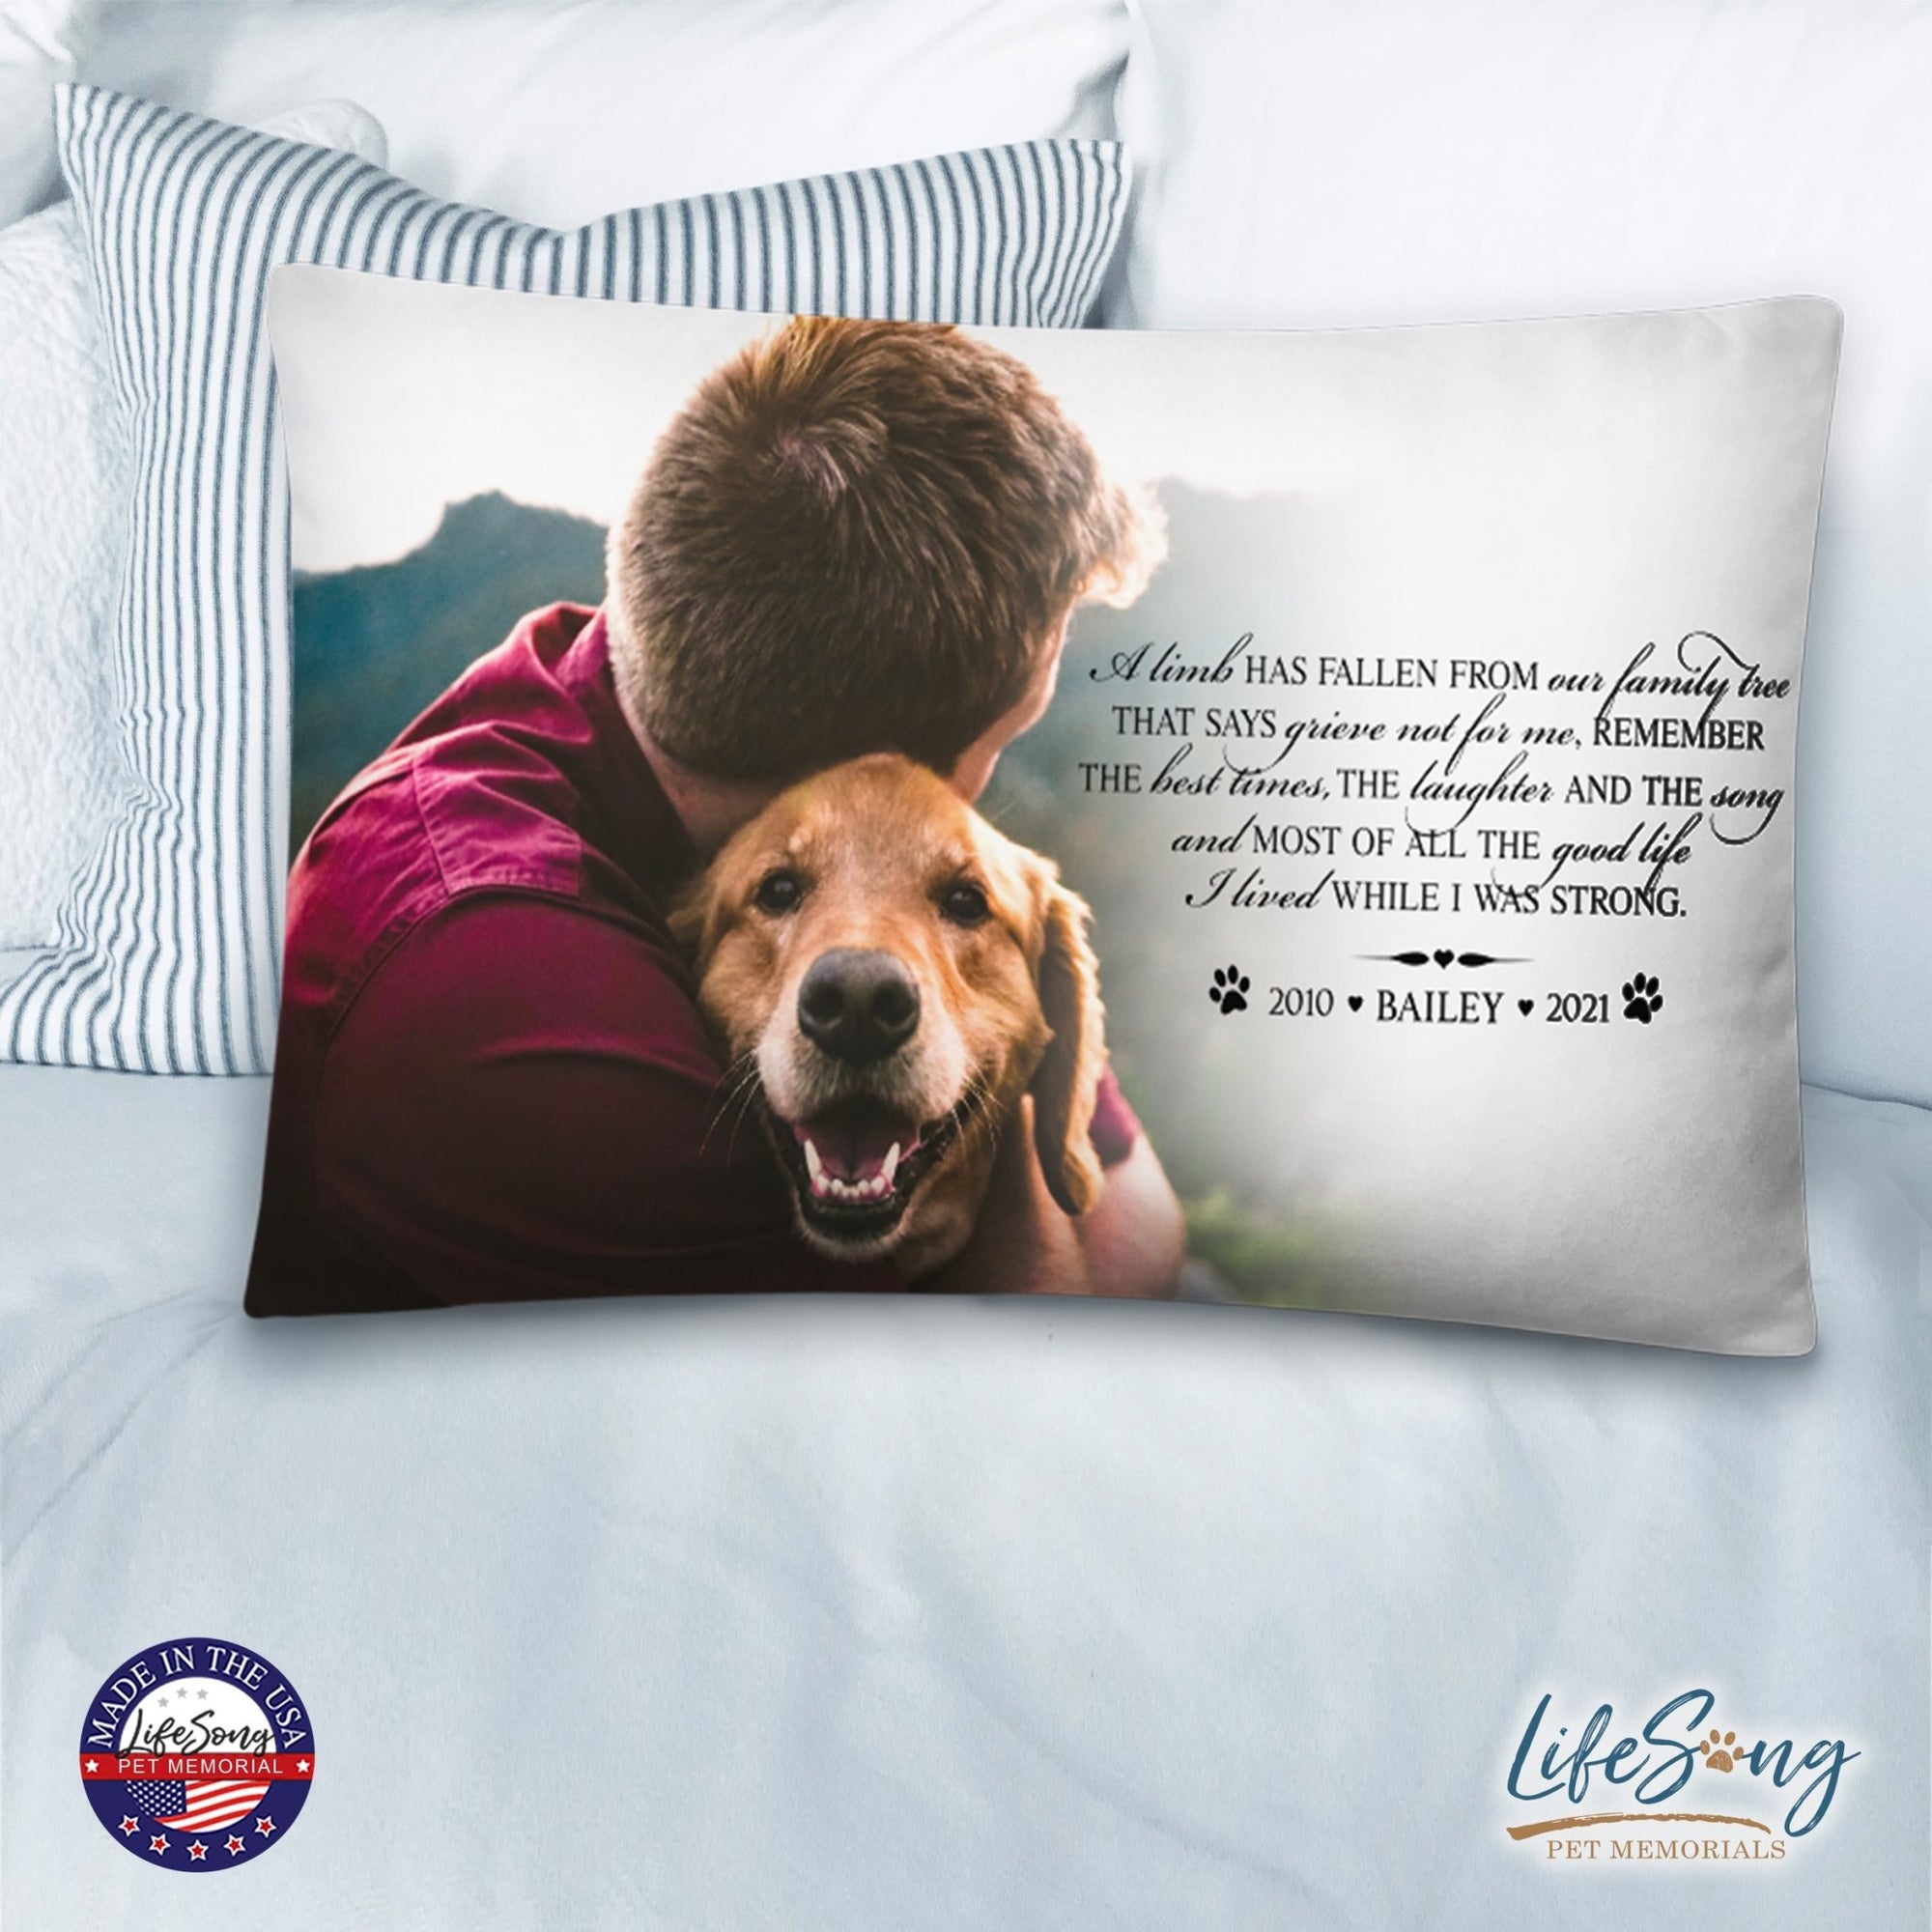 Personalized Pet Memorial Printed Throw Pillow - A Limb Has Fallen From Our Family Tree - LifeSong Milestones